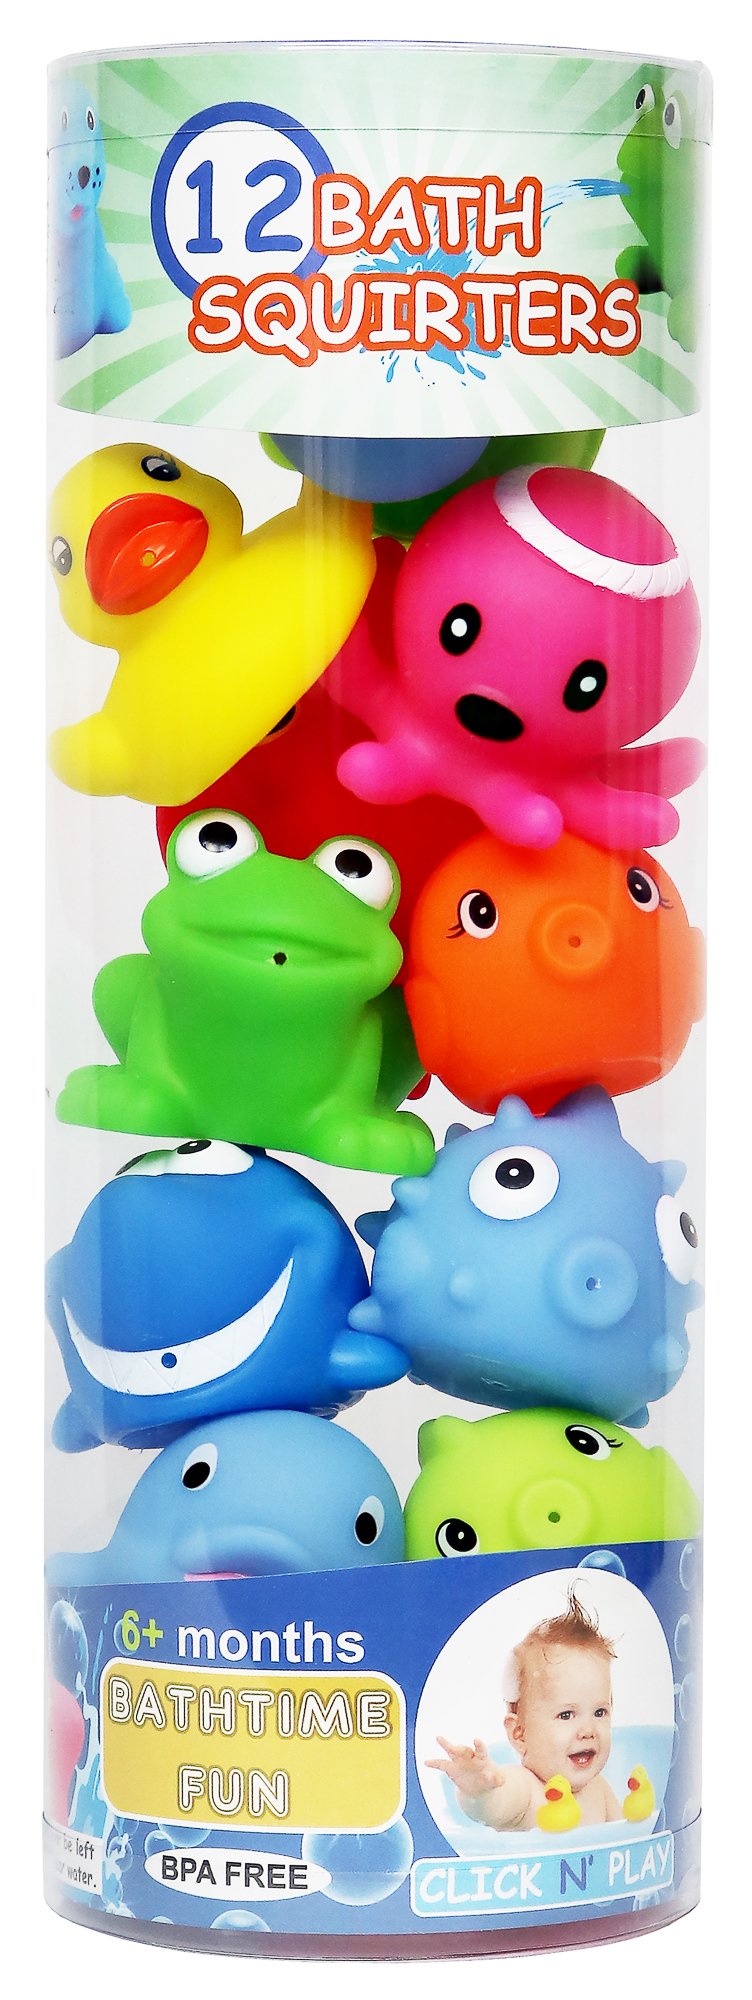 Click N' Play Assorted Colorful Bath Squirters for 6 months to 999 months (12 Pack)